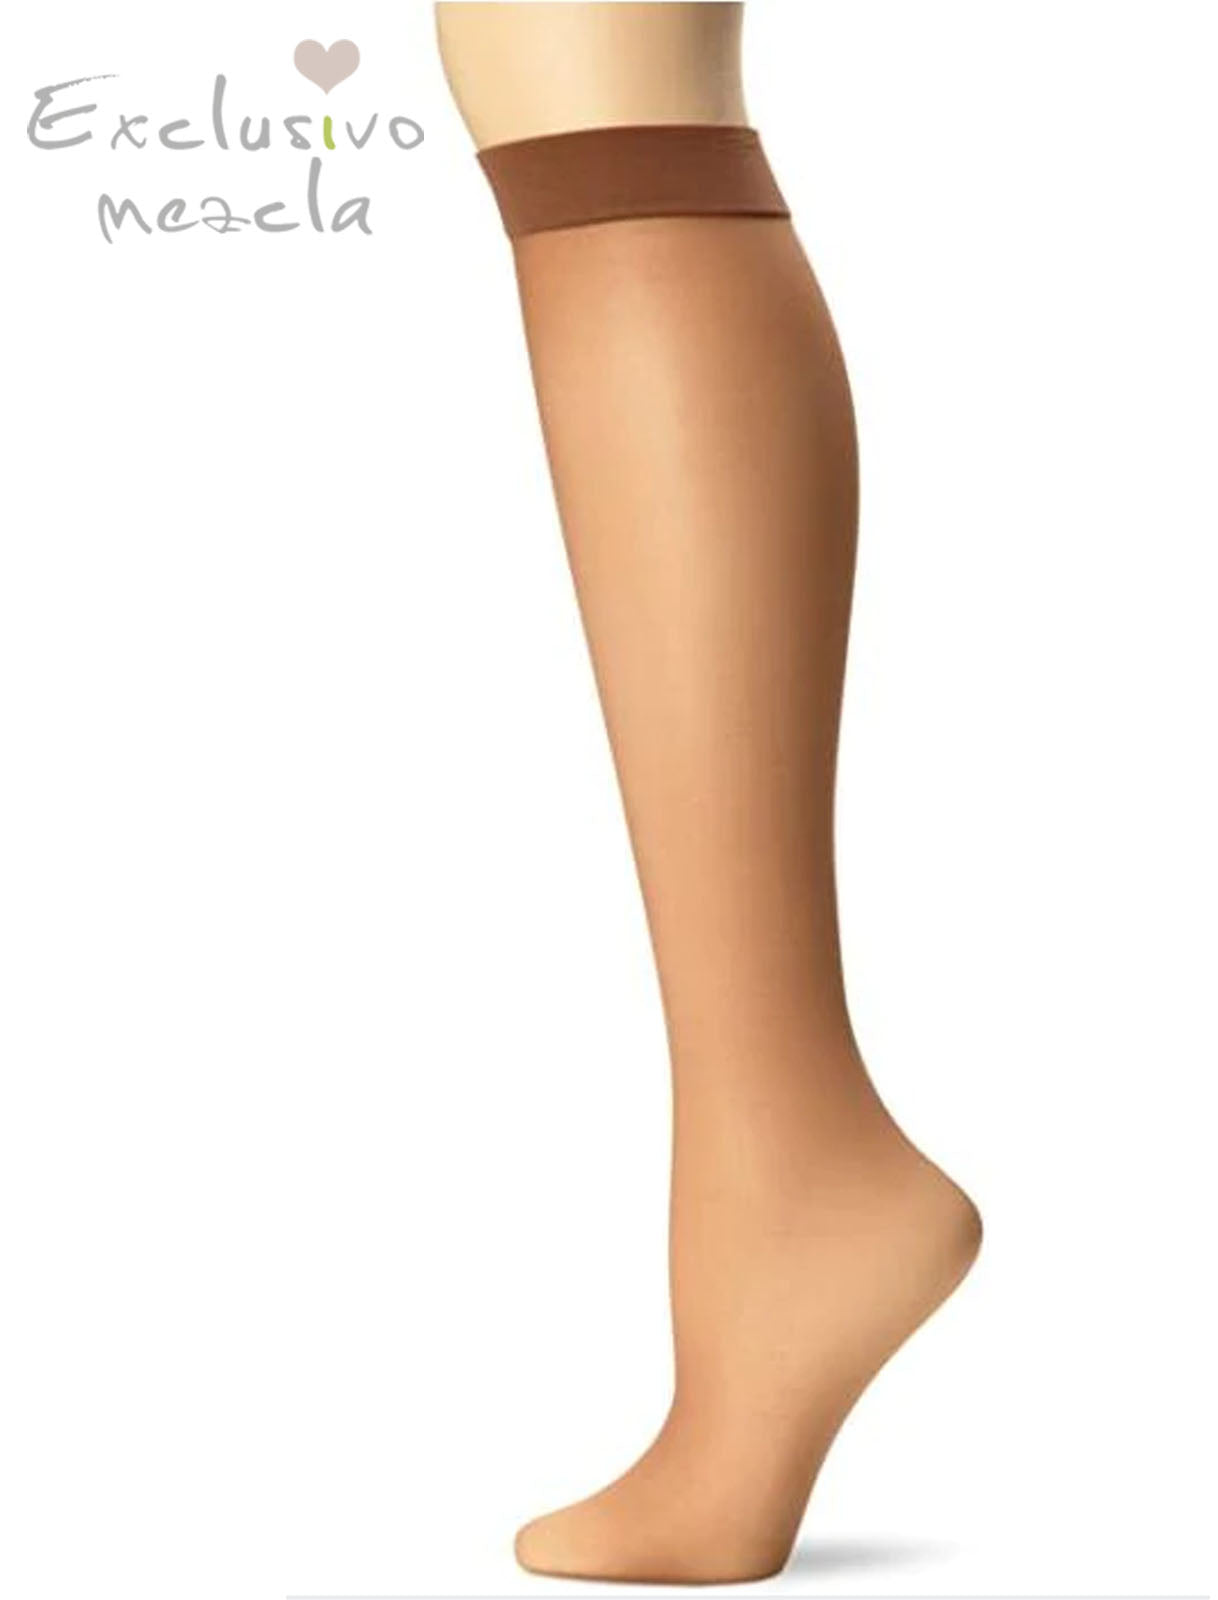 Exclusivo Mezcla Silk Reflections Women's Knee High With No Slip Band